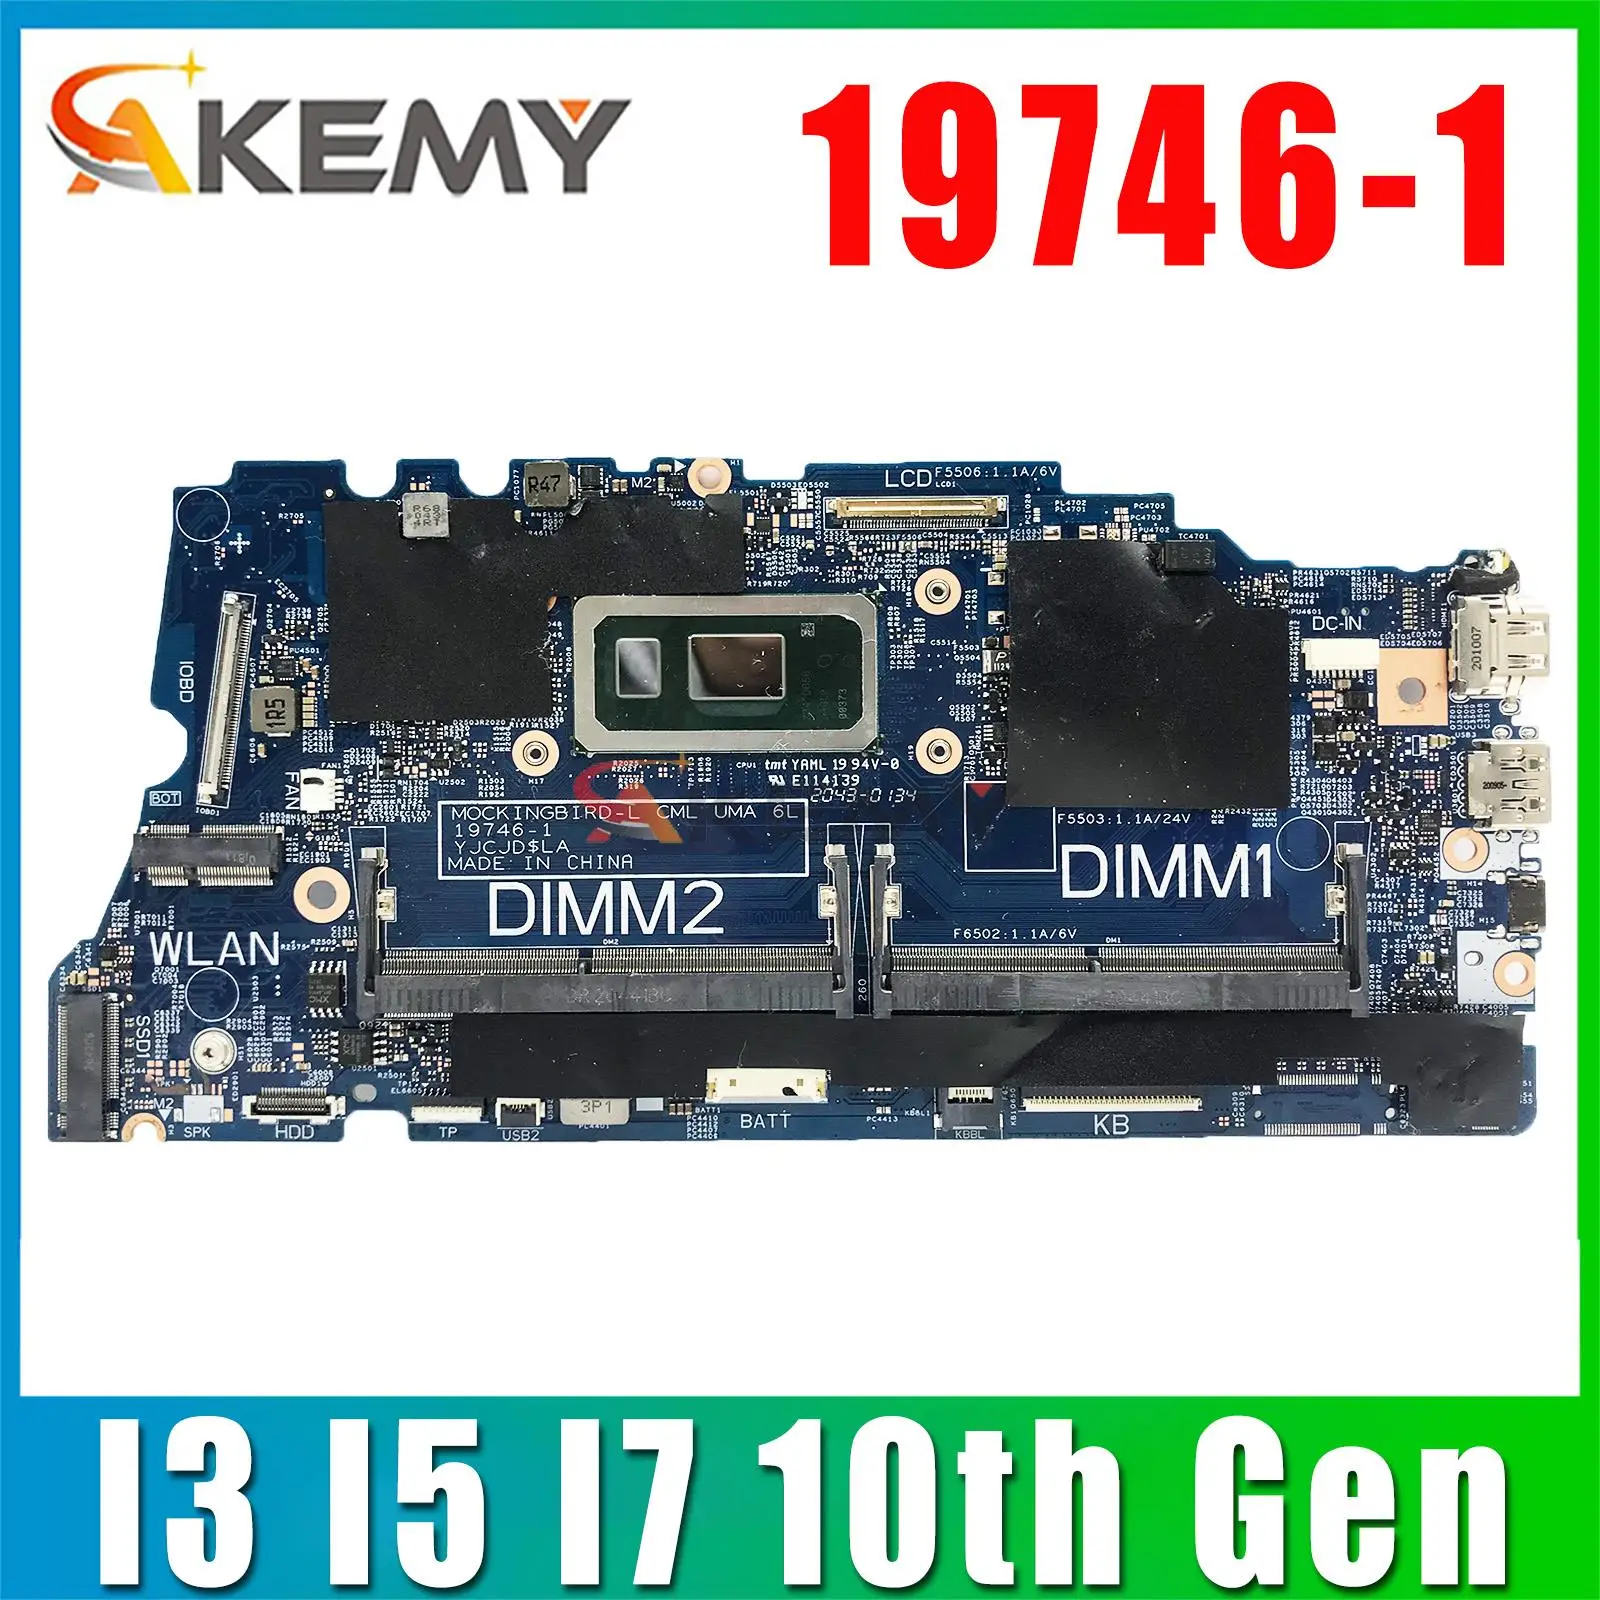 

For Dell Latitude 3410 3510 Laptop Notebook Motherboard 19746-1 With i3-10110U i5-10210U i7-10510U CPU 100% Fully tested